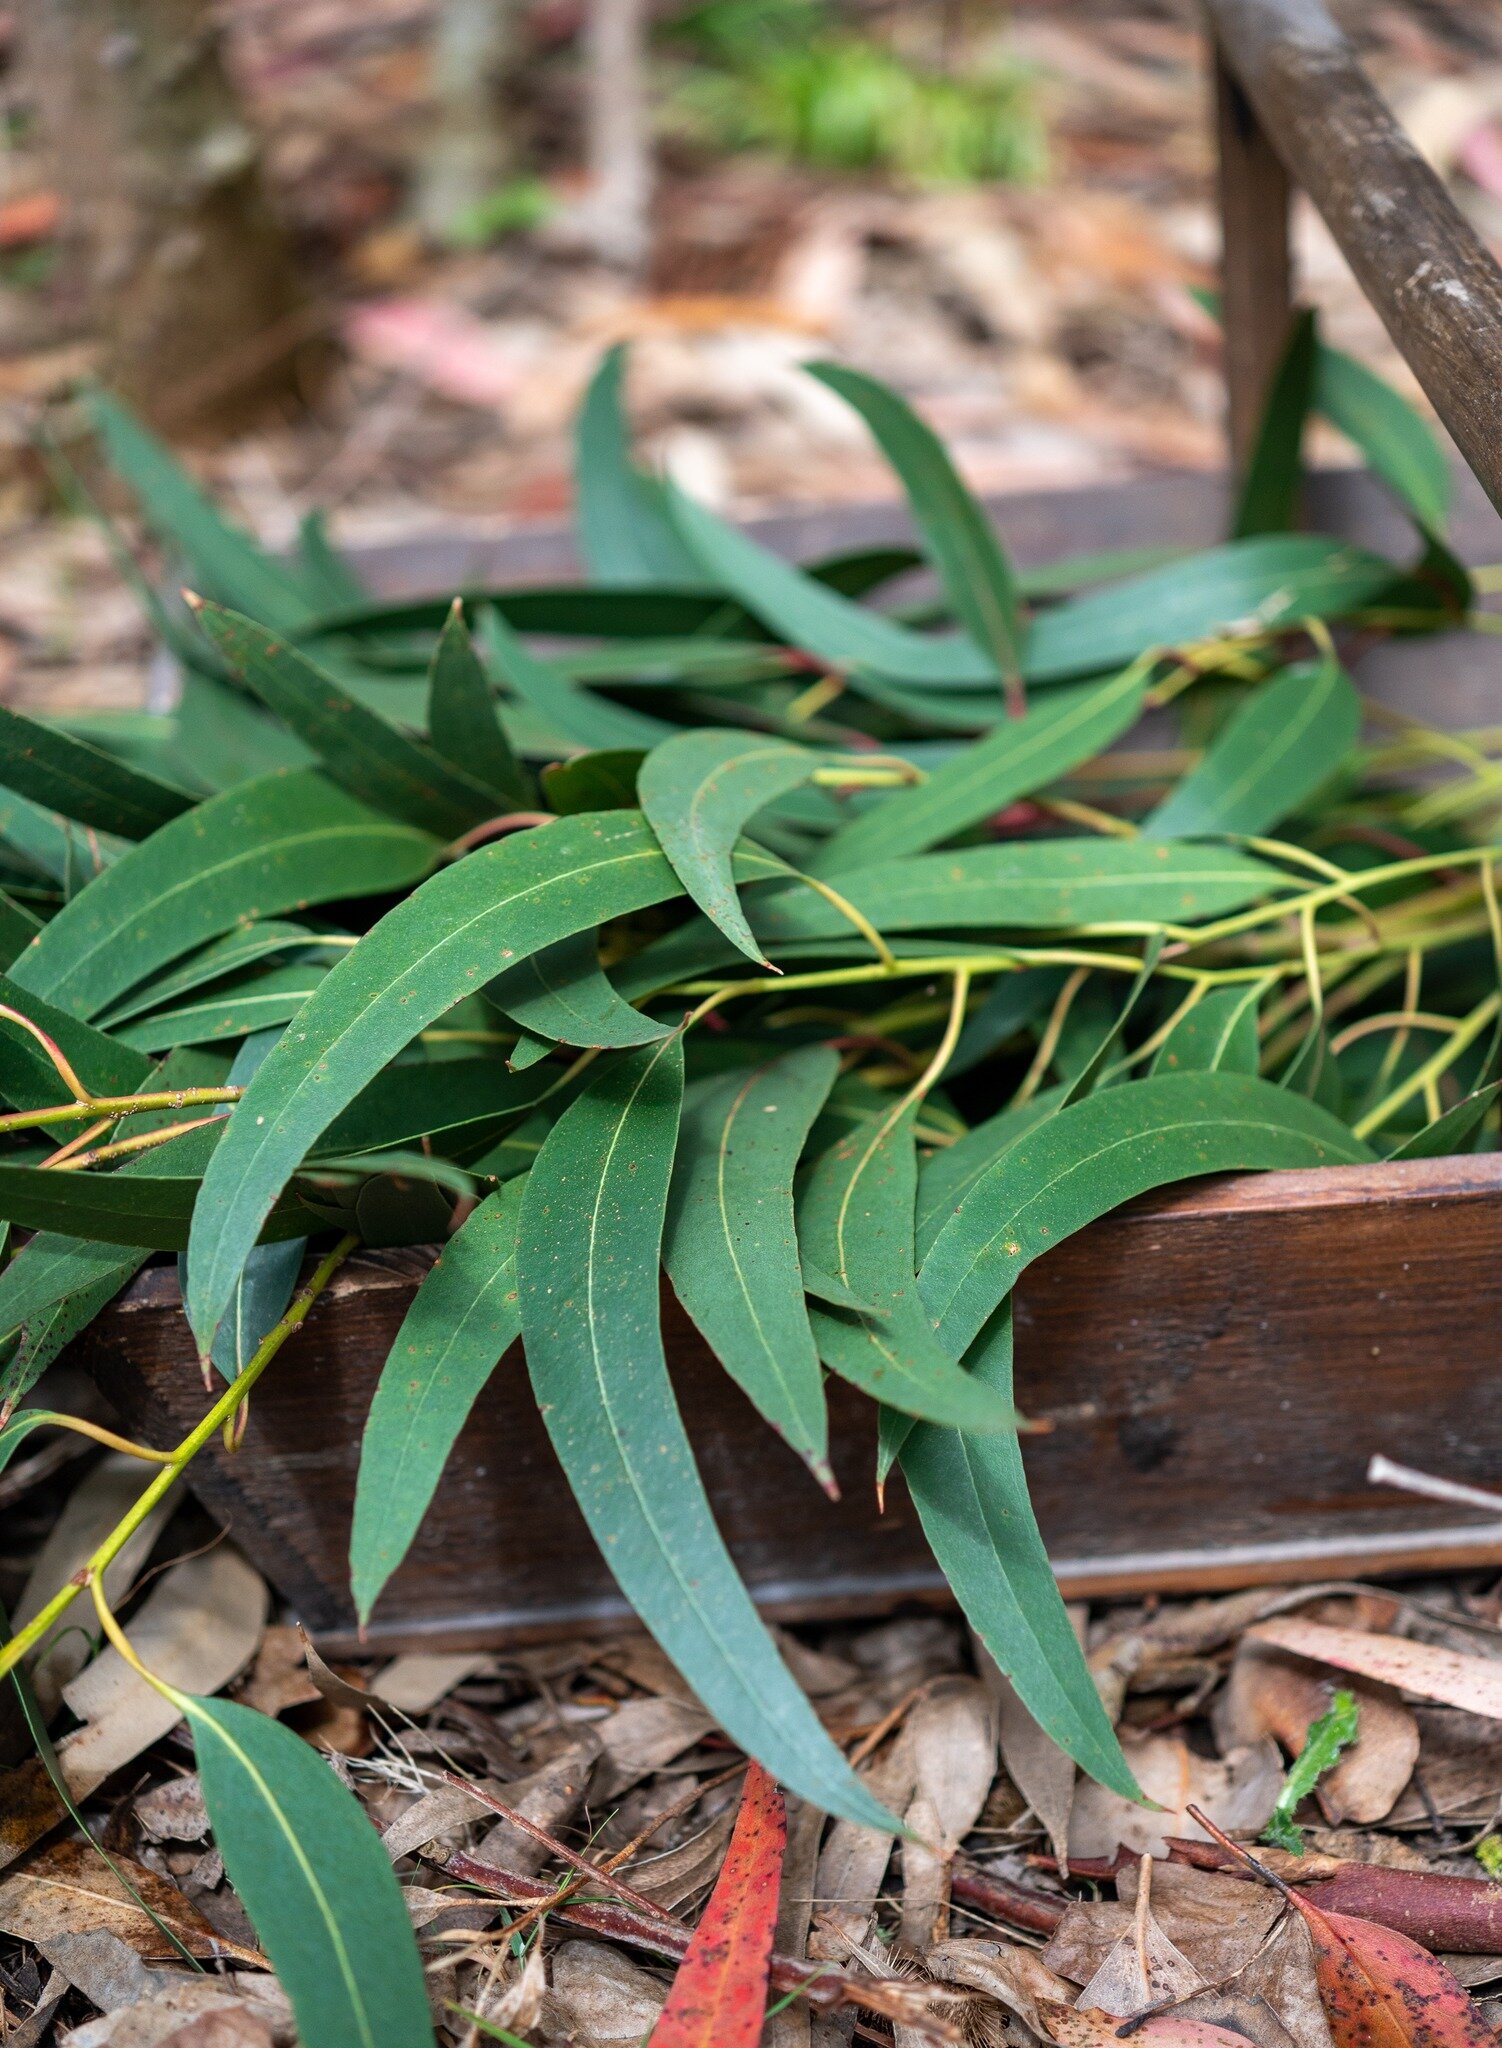 Merry Twixmas everyone from Hill Hassall Botanics.

Feeling a bit chilly? Remember the warming properties of eucalyptus;  combine our all natural, Island-made cordial with hot water and maybe some fresh orange juice for a winter pick-up.

Fancy a ref